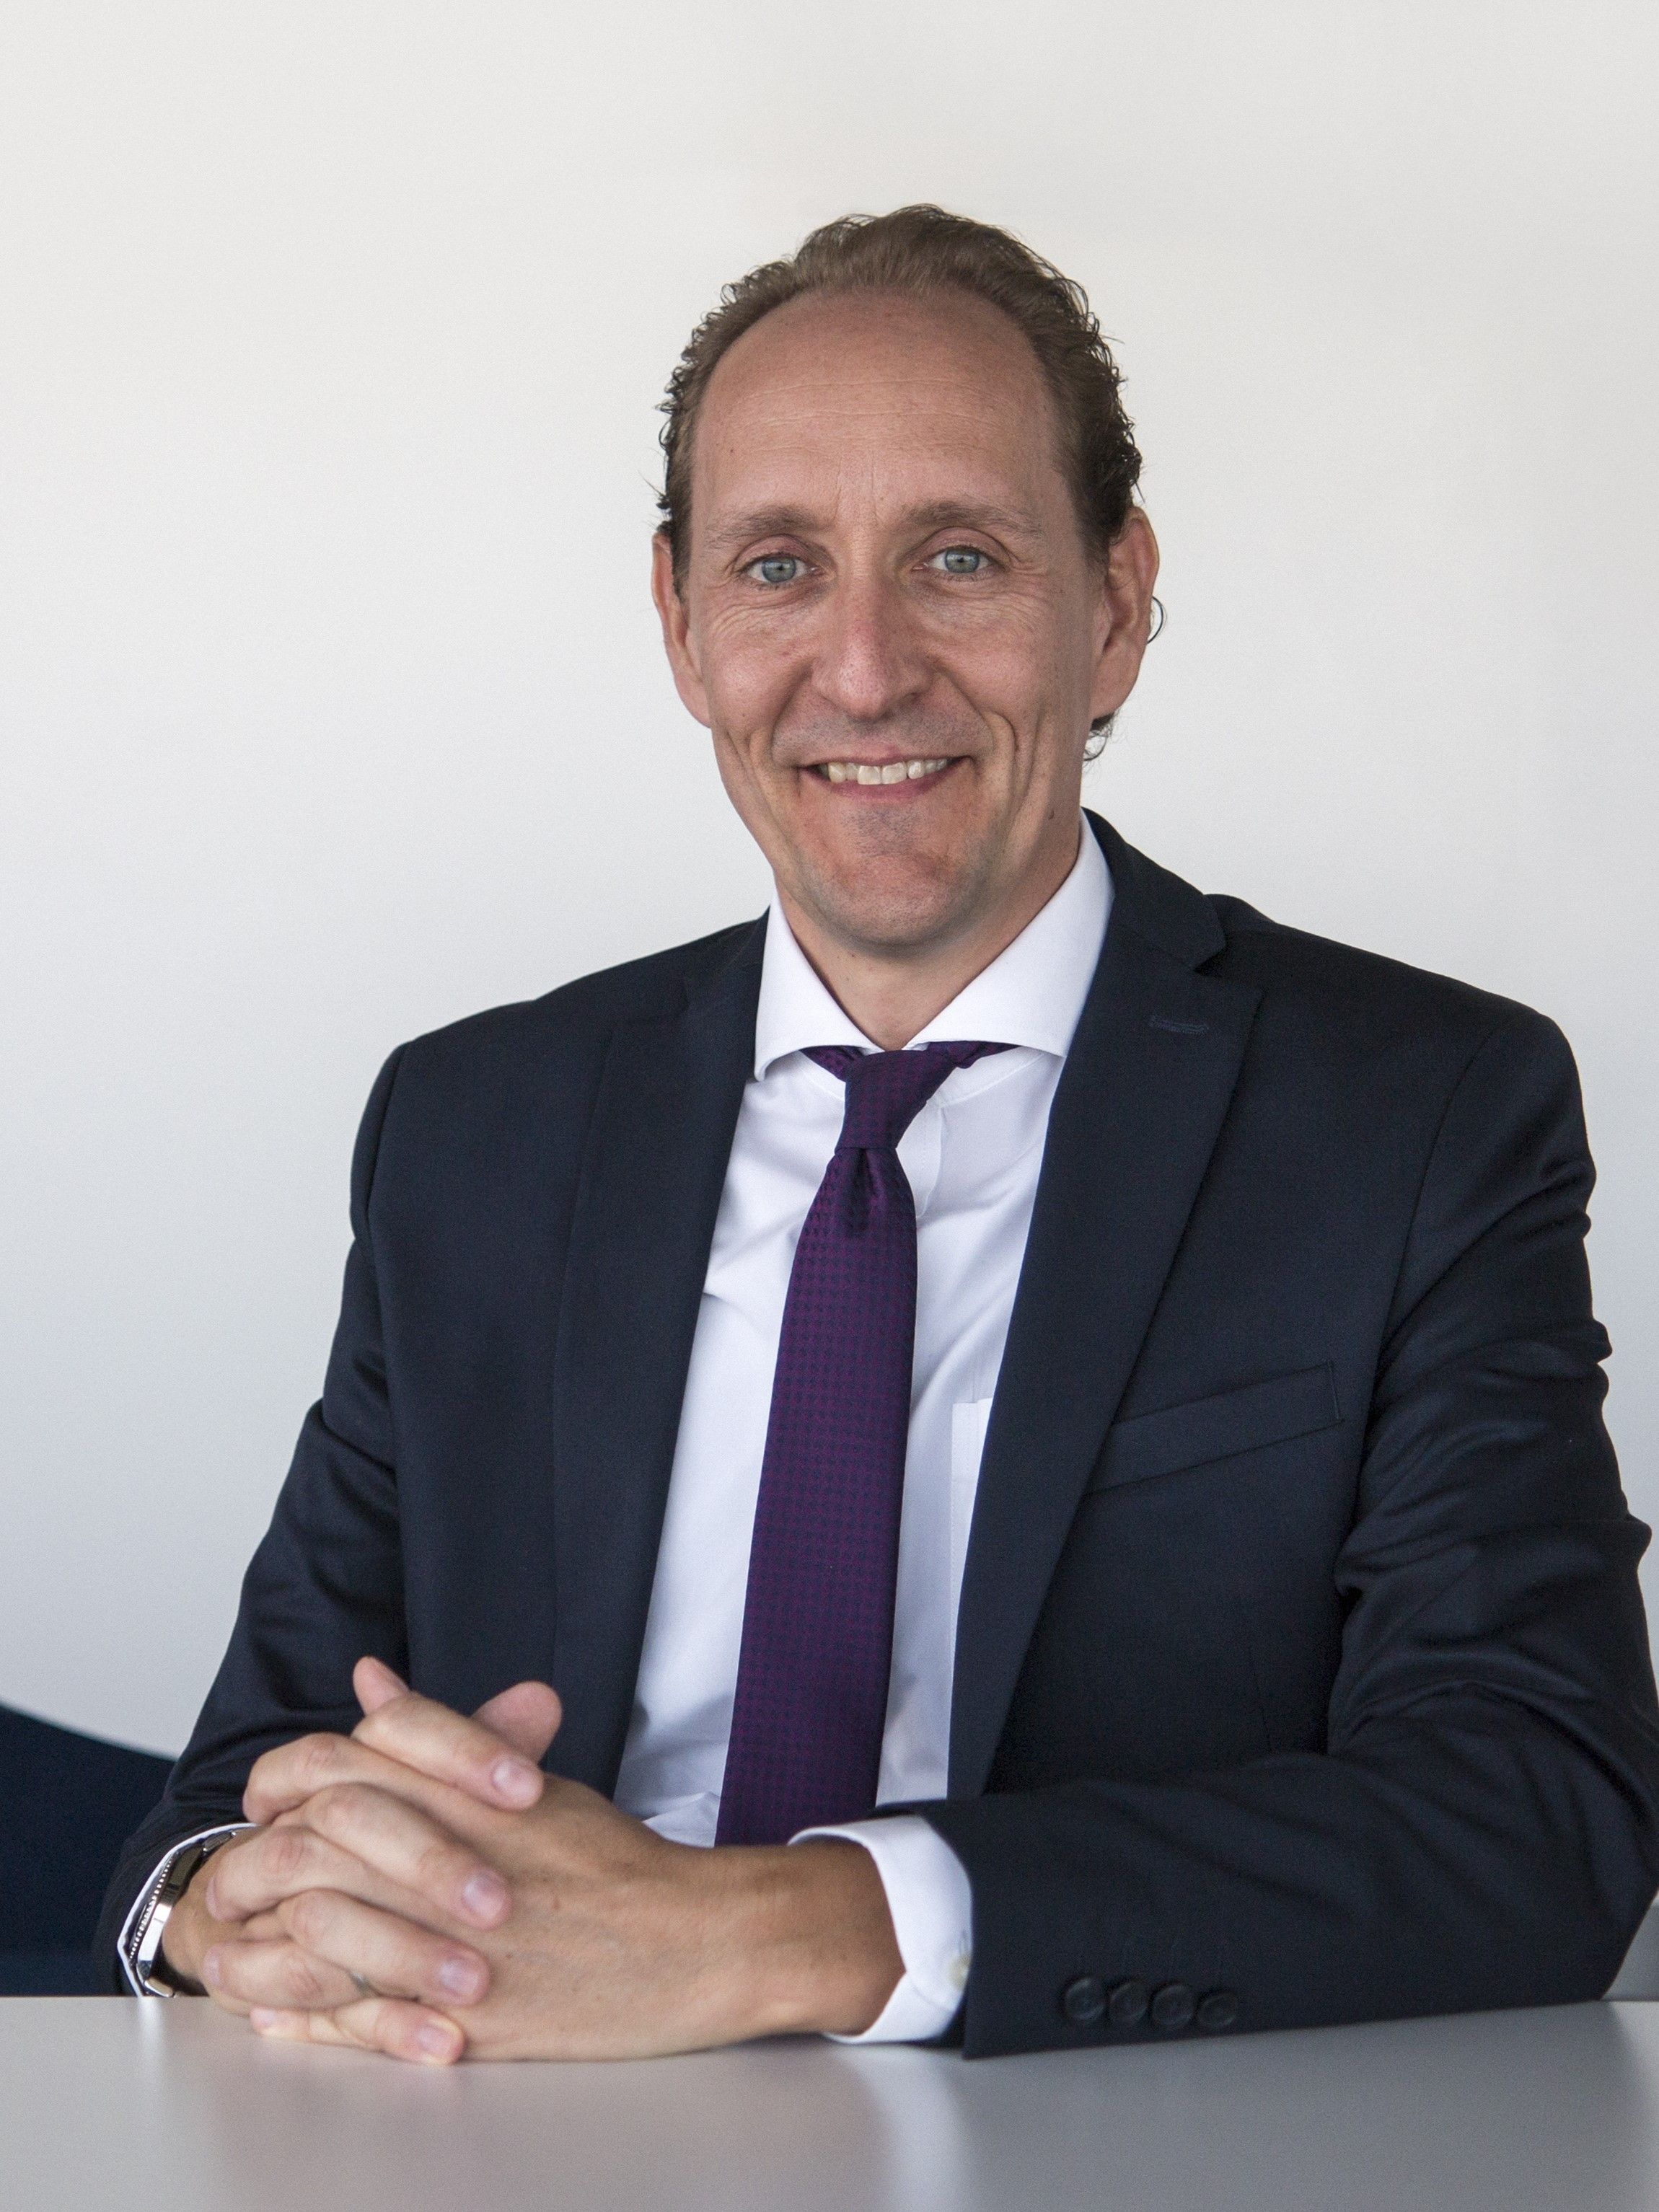 Dieter Vranckx appointed as new chair of Brussels Airlines